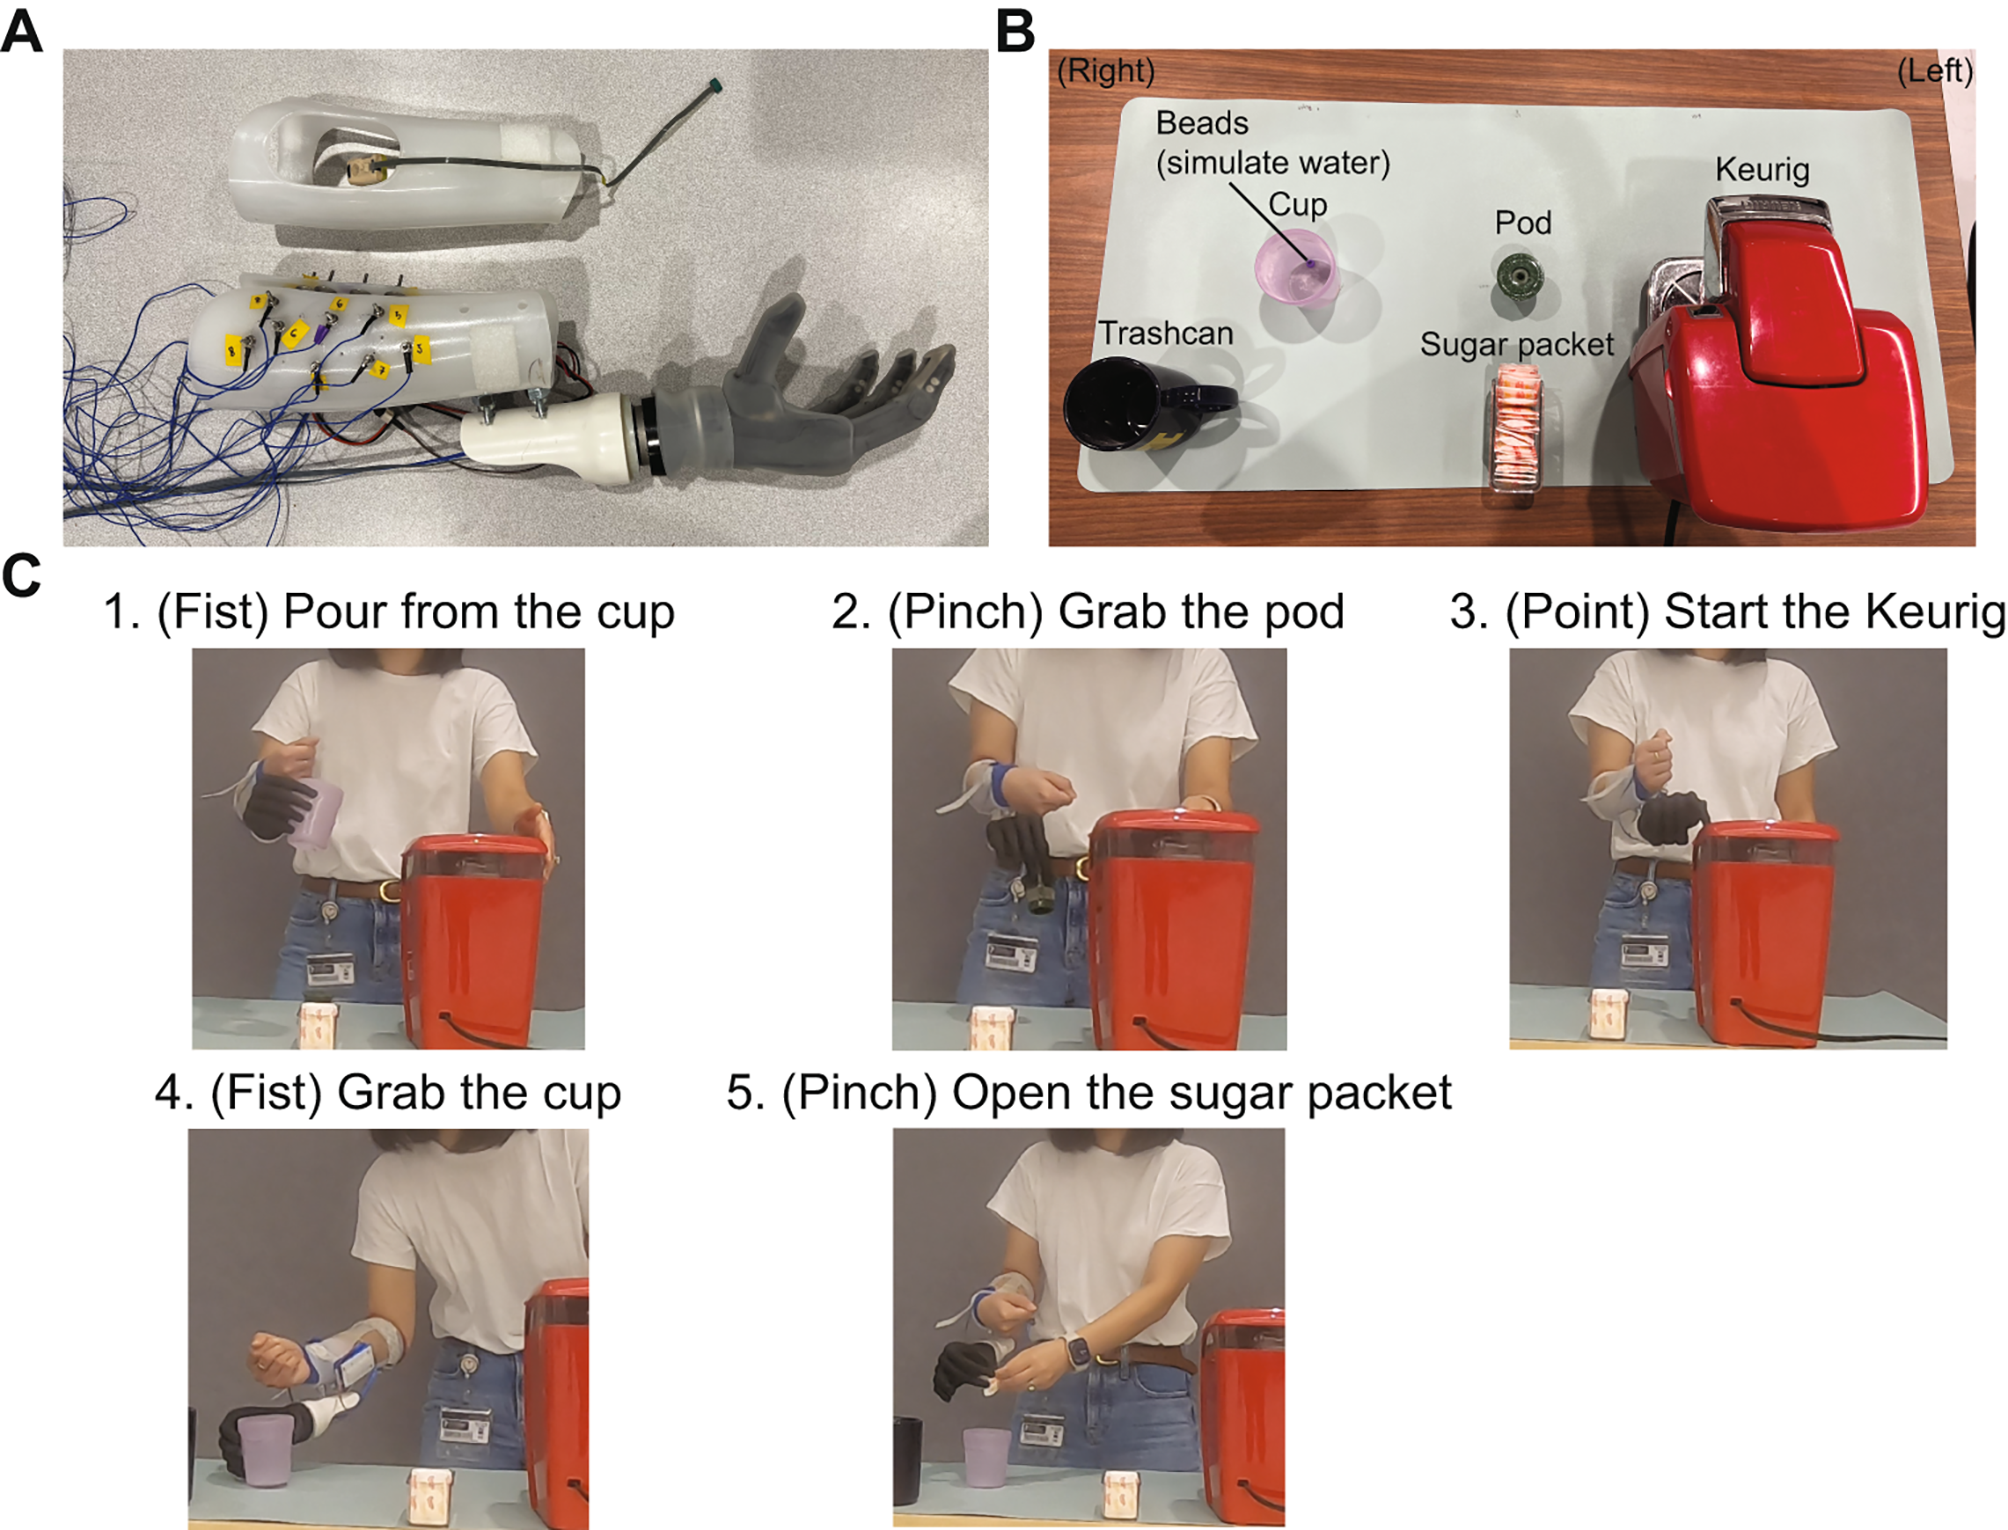 Development and validation of the coffee task: a novel functional assessment for prosthetic grip selection